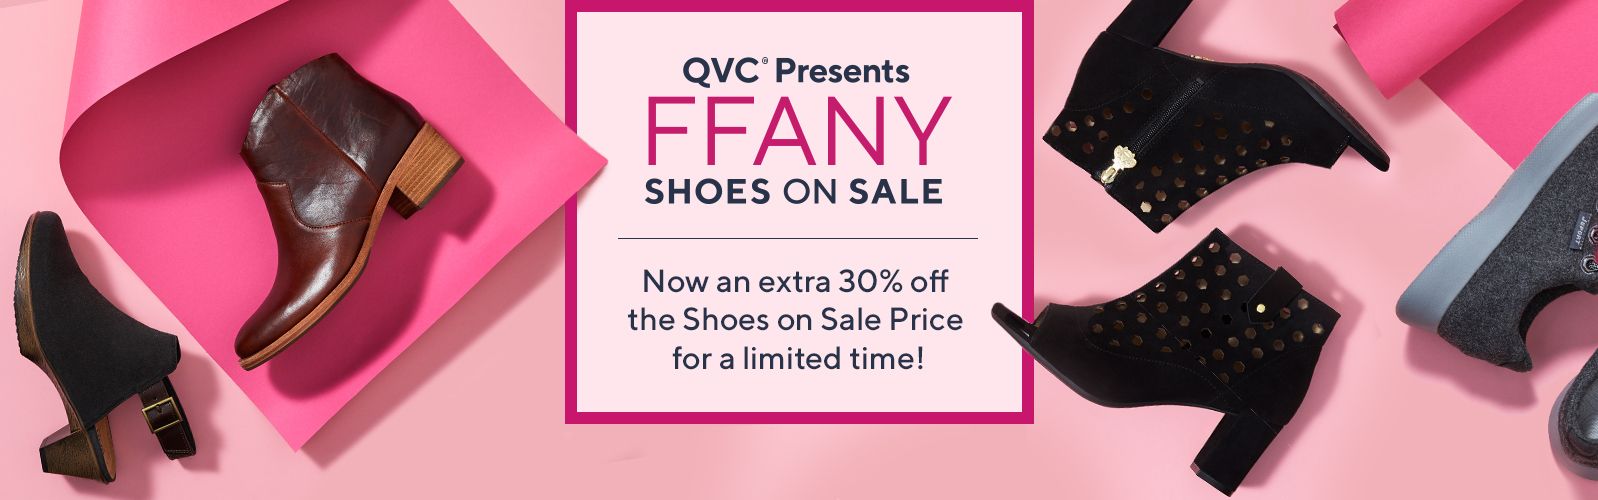 qvc clearance shoes